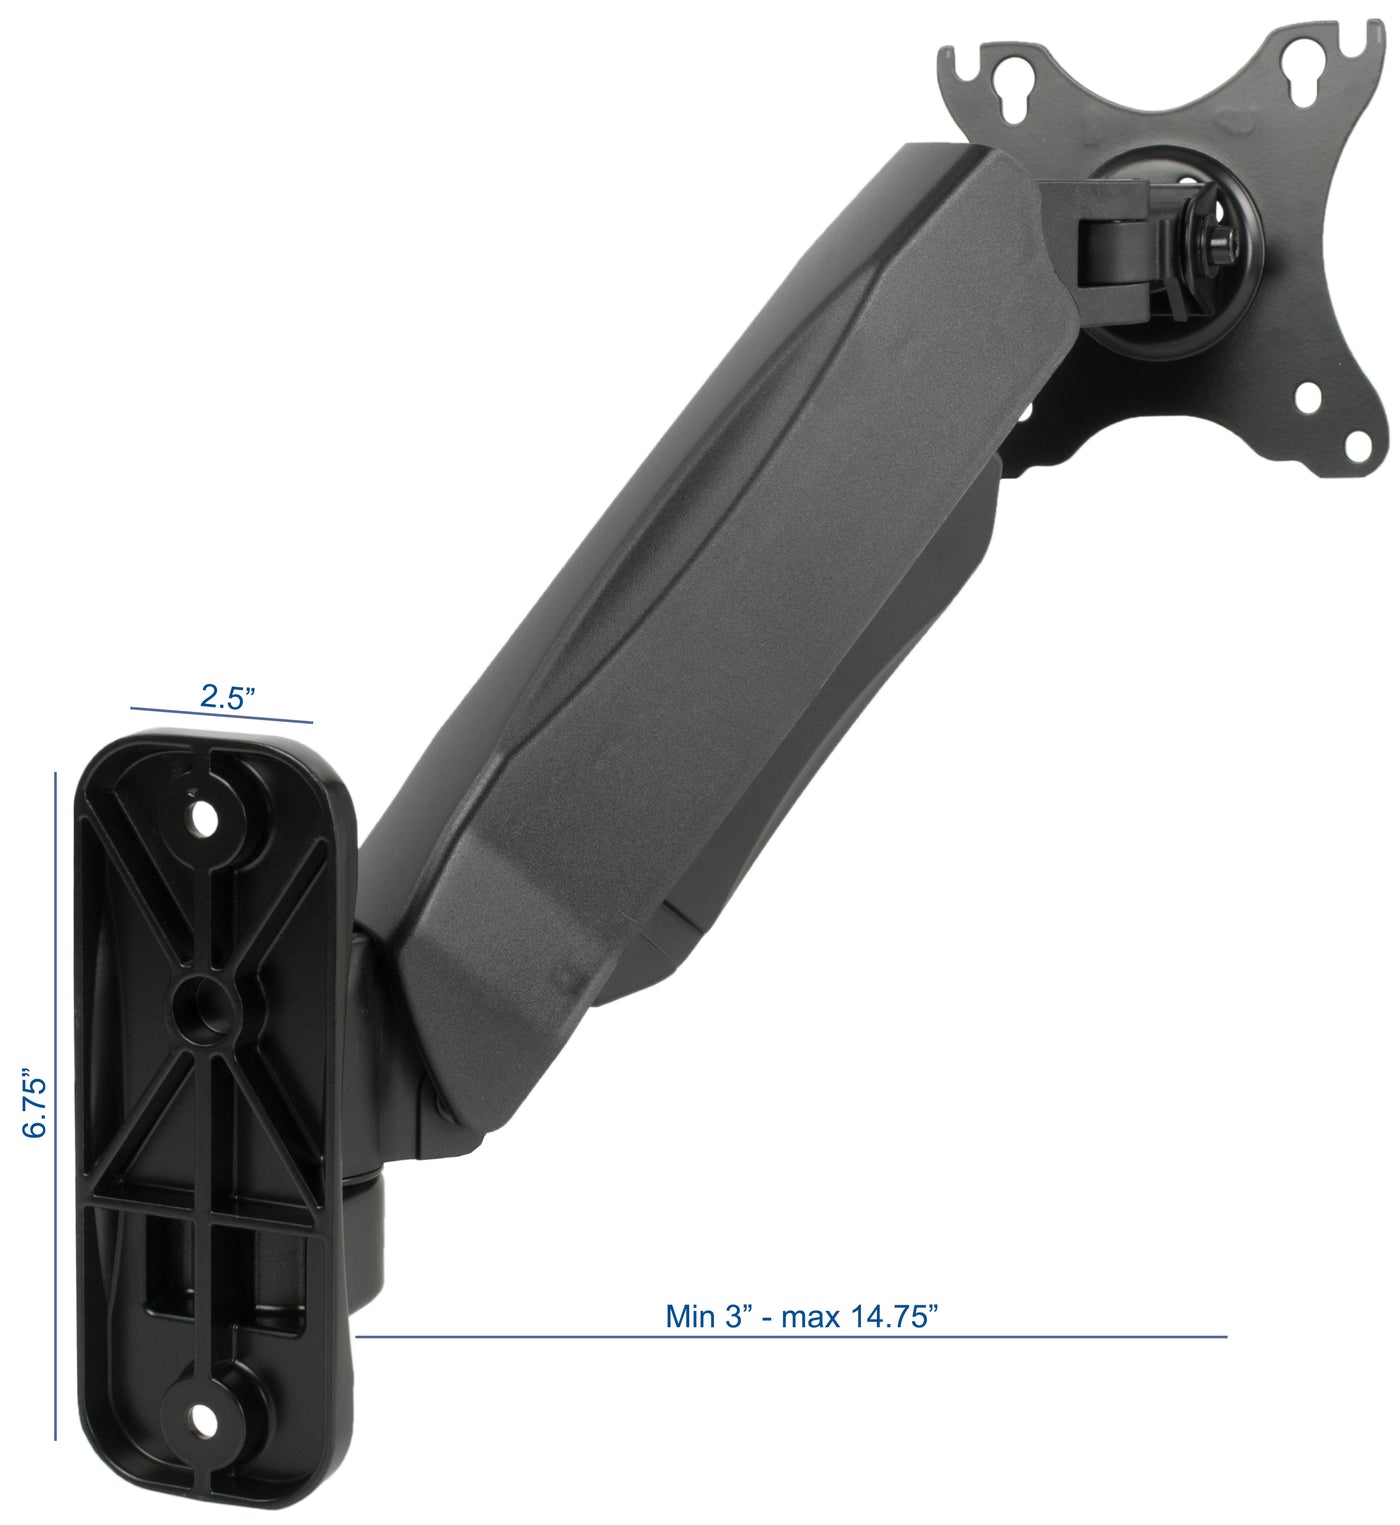 Dimensions and specification or length width and height of monitor arm wall mount.